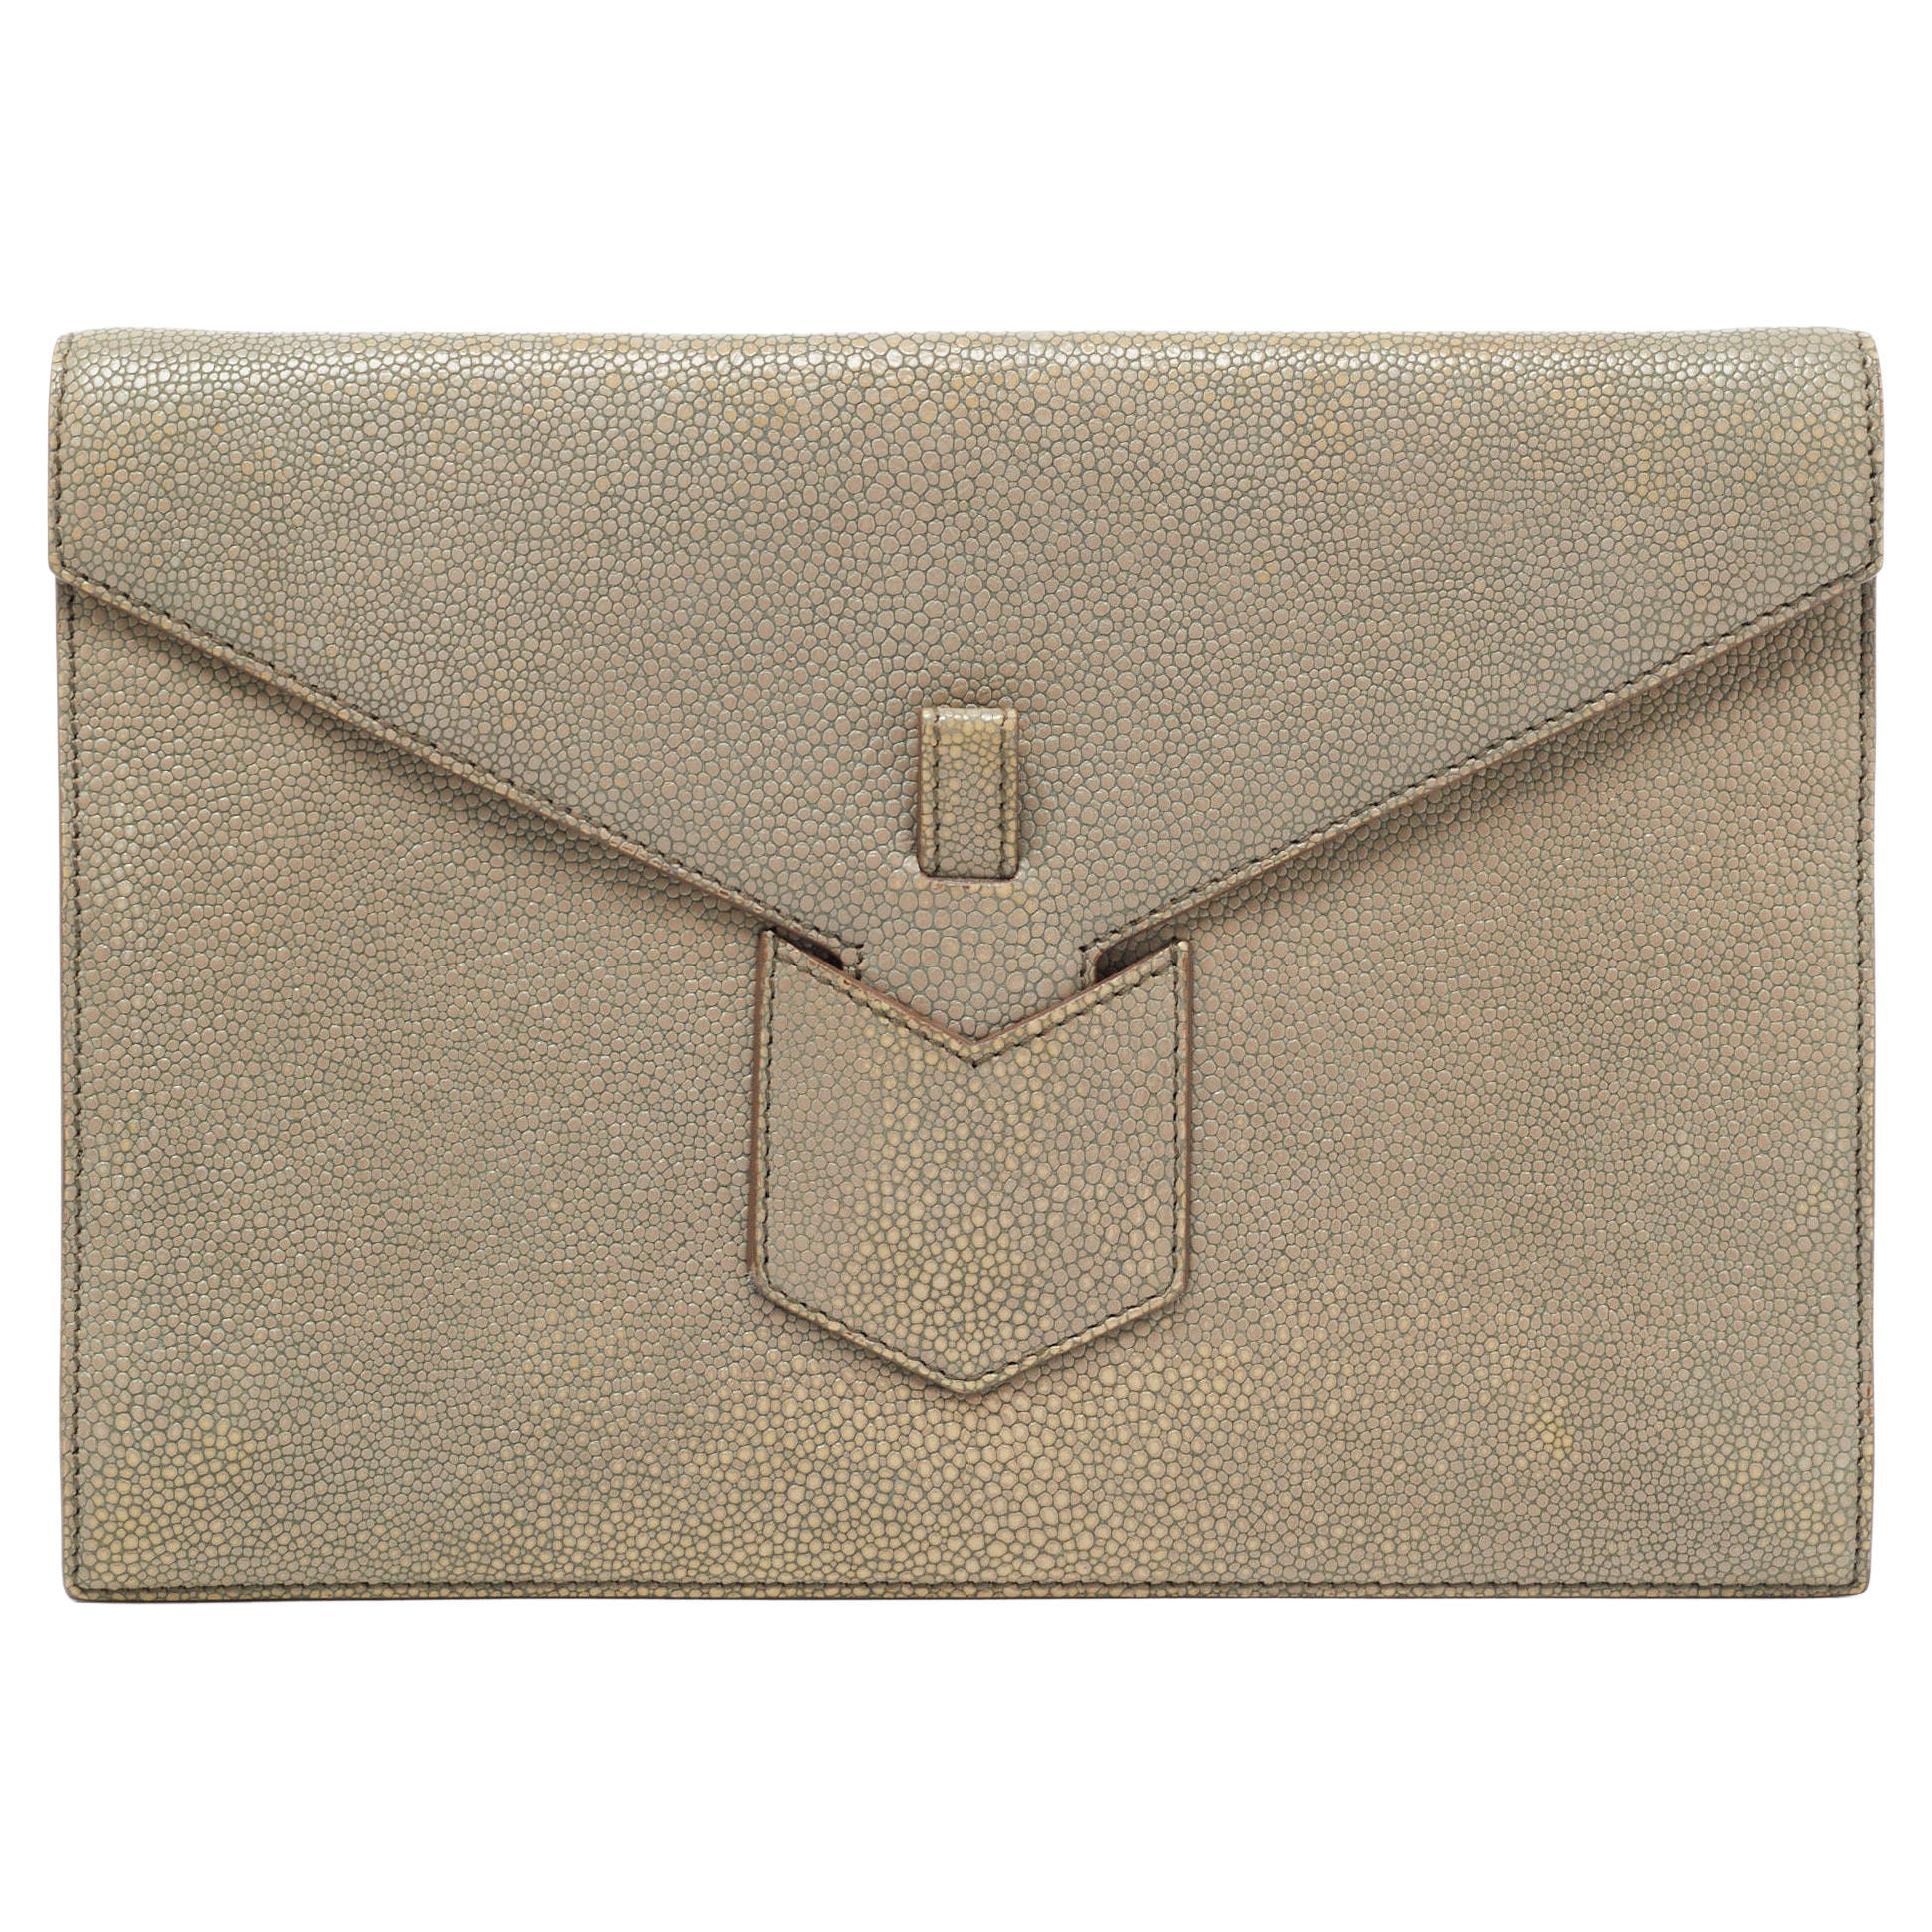 envelope large in quilted grain de poudre embossed leather